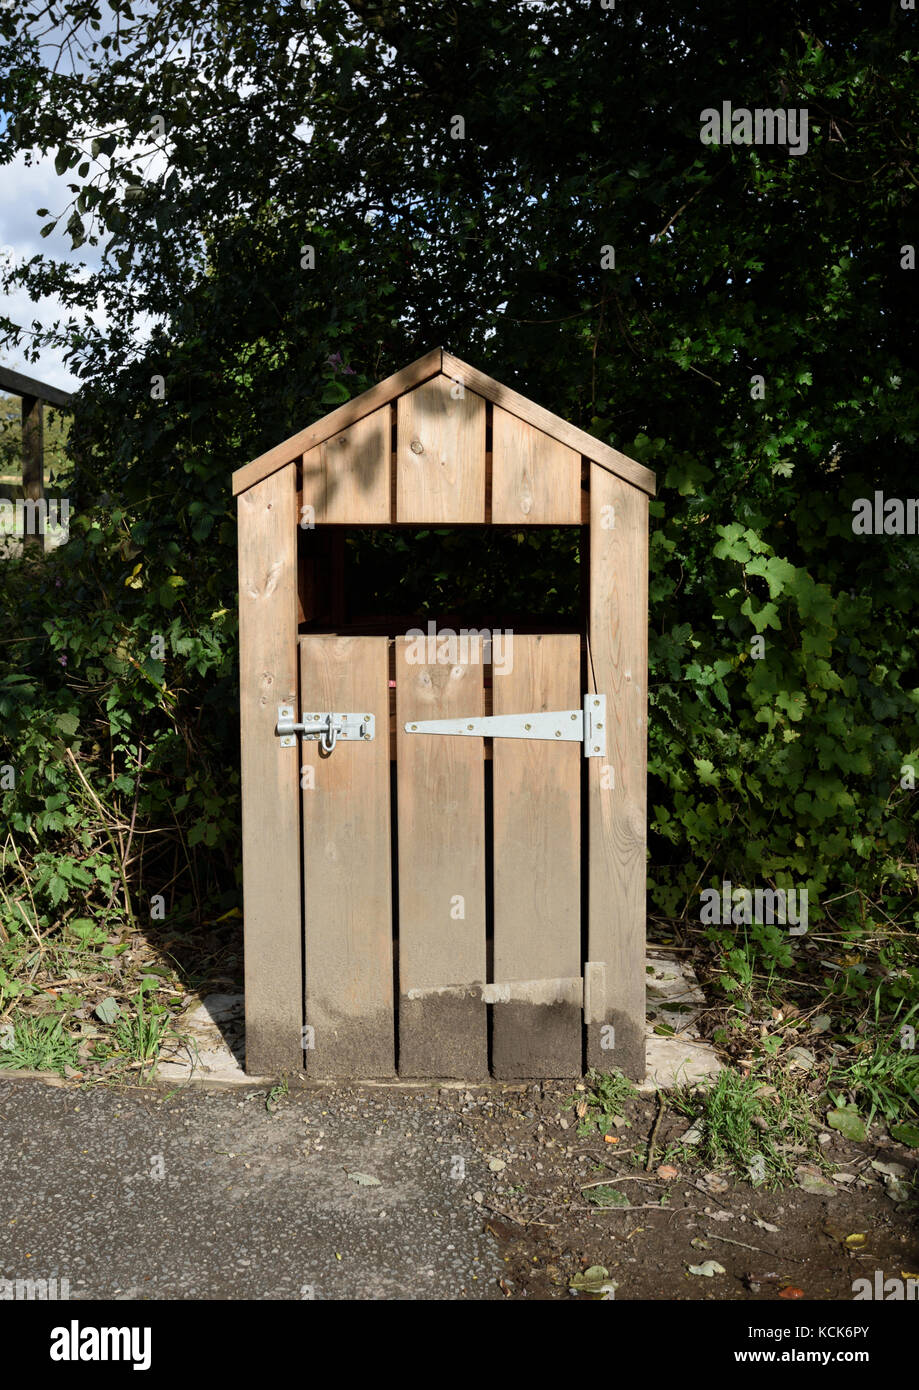 Wooden structure covering waste bin  in burrs country park bury lancashire uk Stock Photo